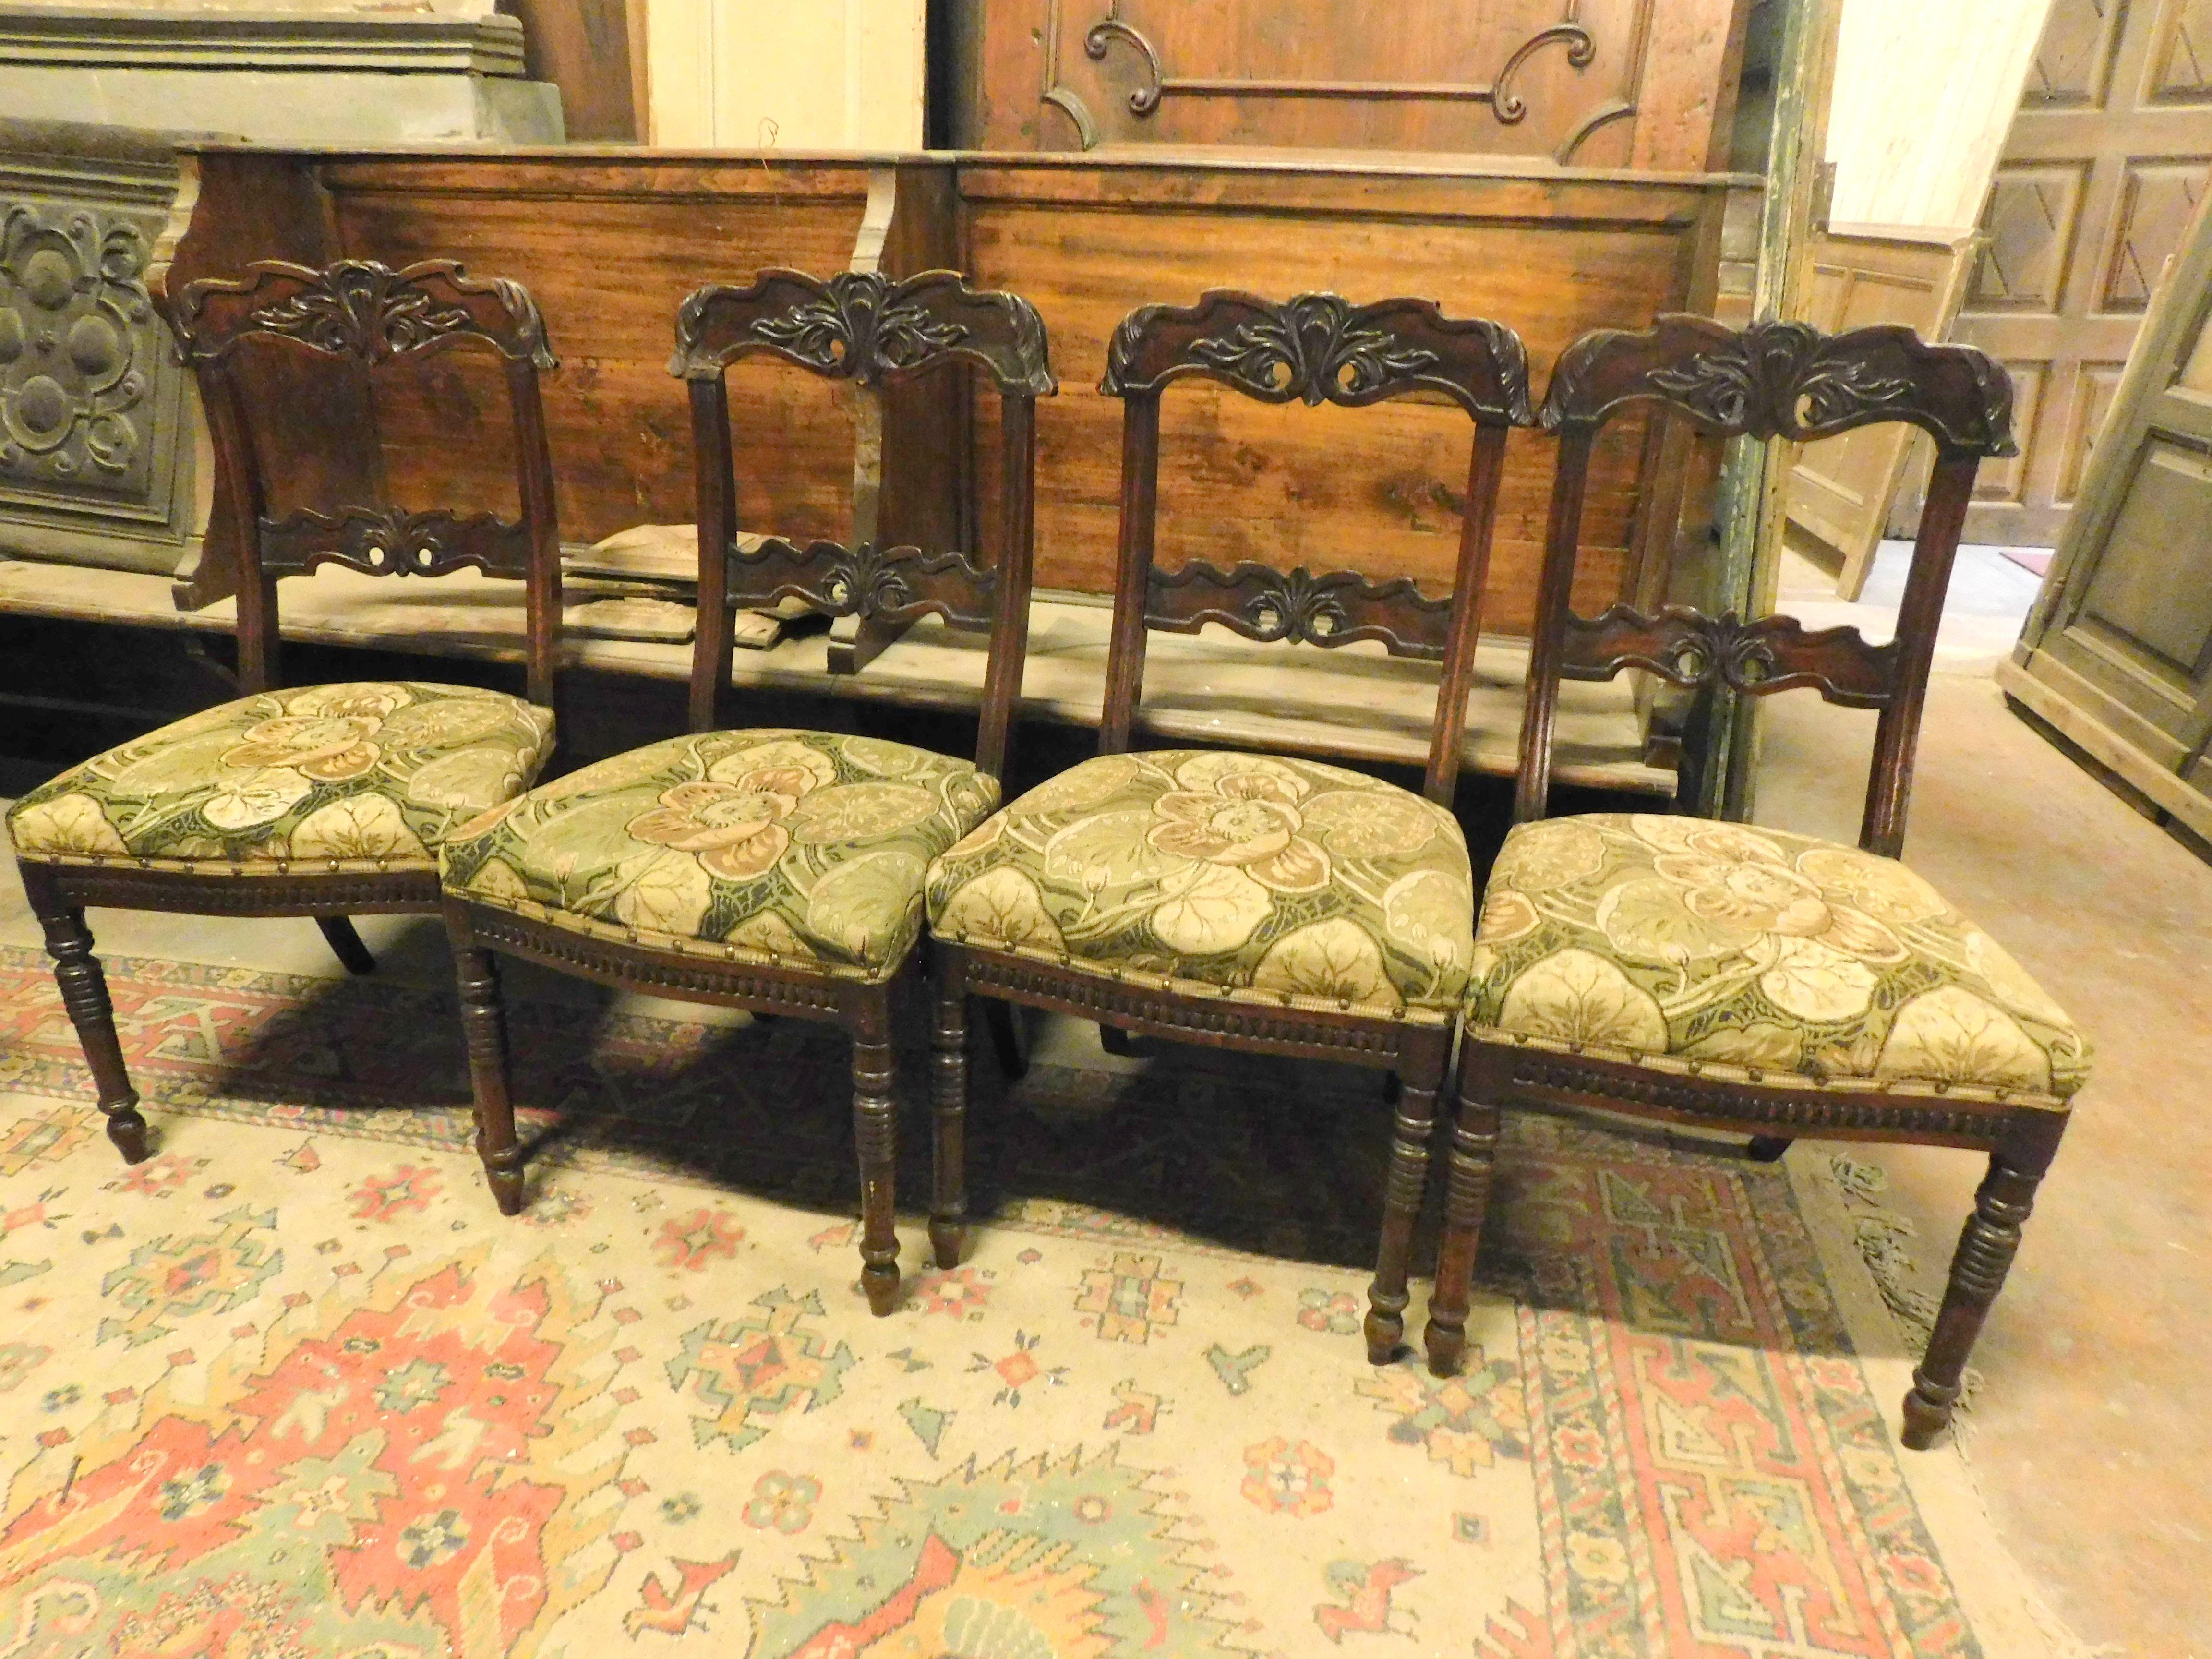 Antique Walnut Living Room Set of 6 Chairs and 2 Armchairs, 19th Century Italy 4